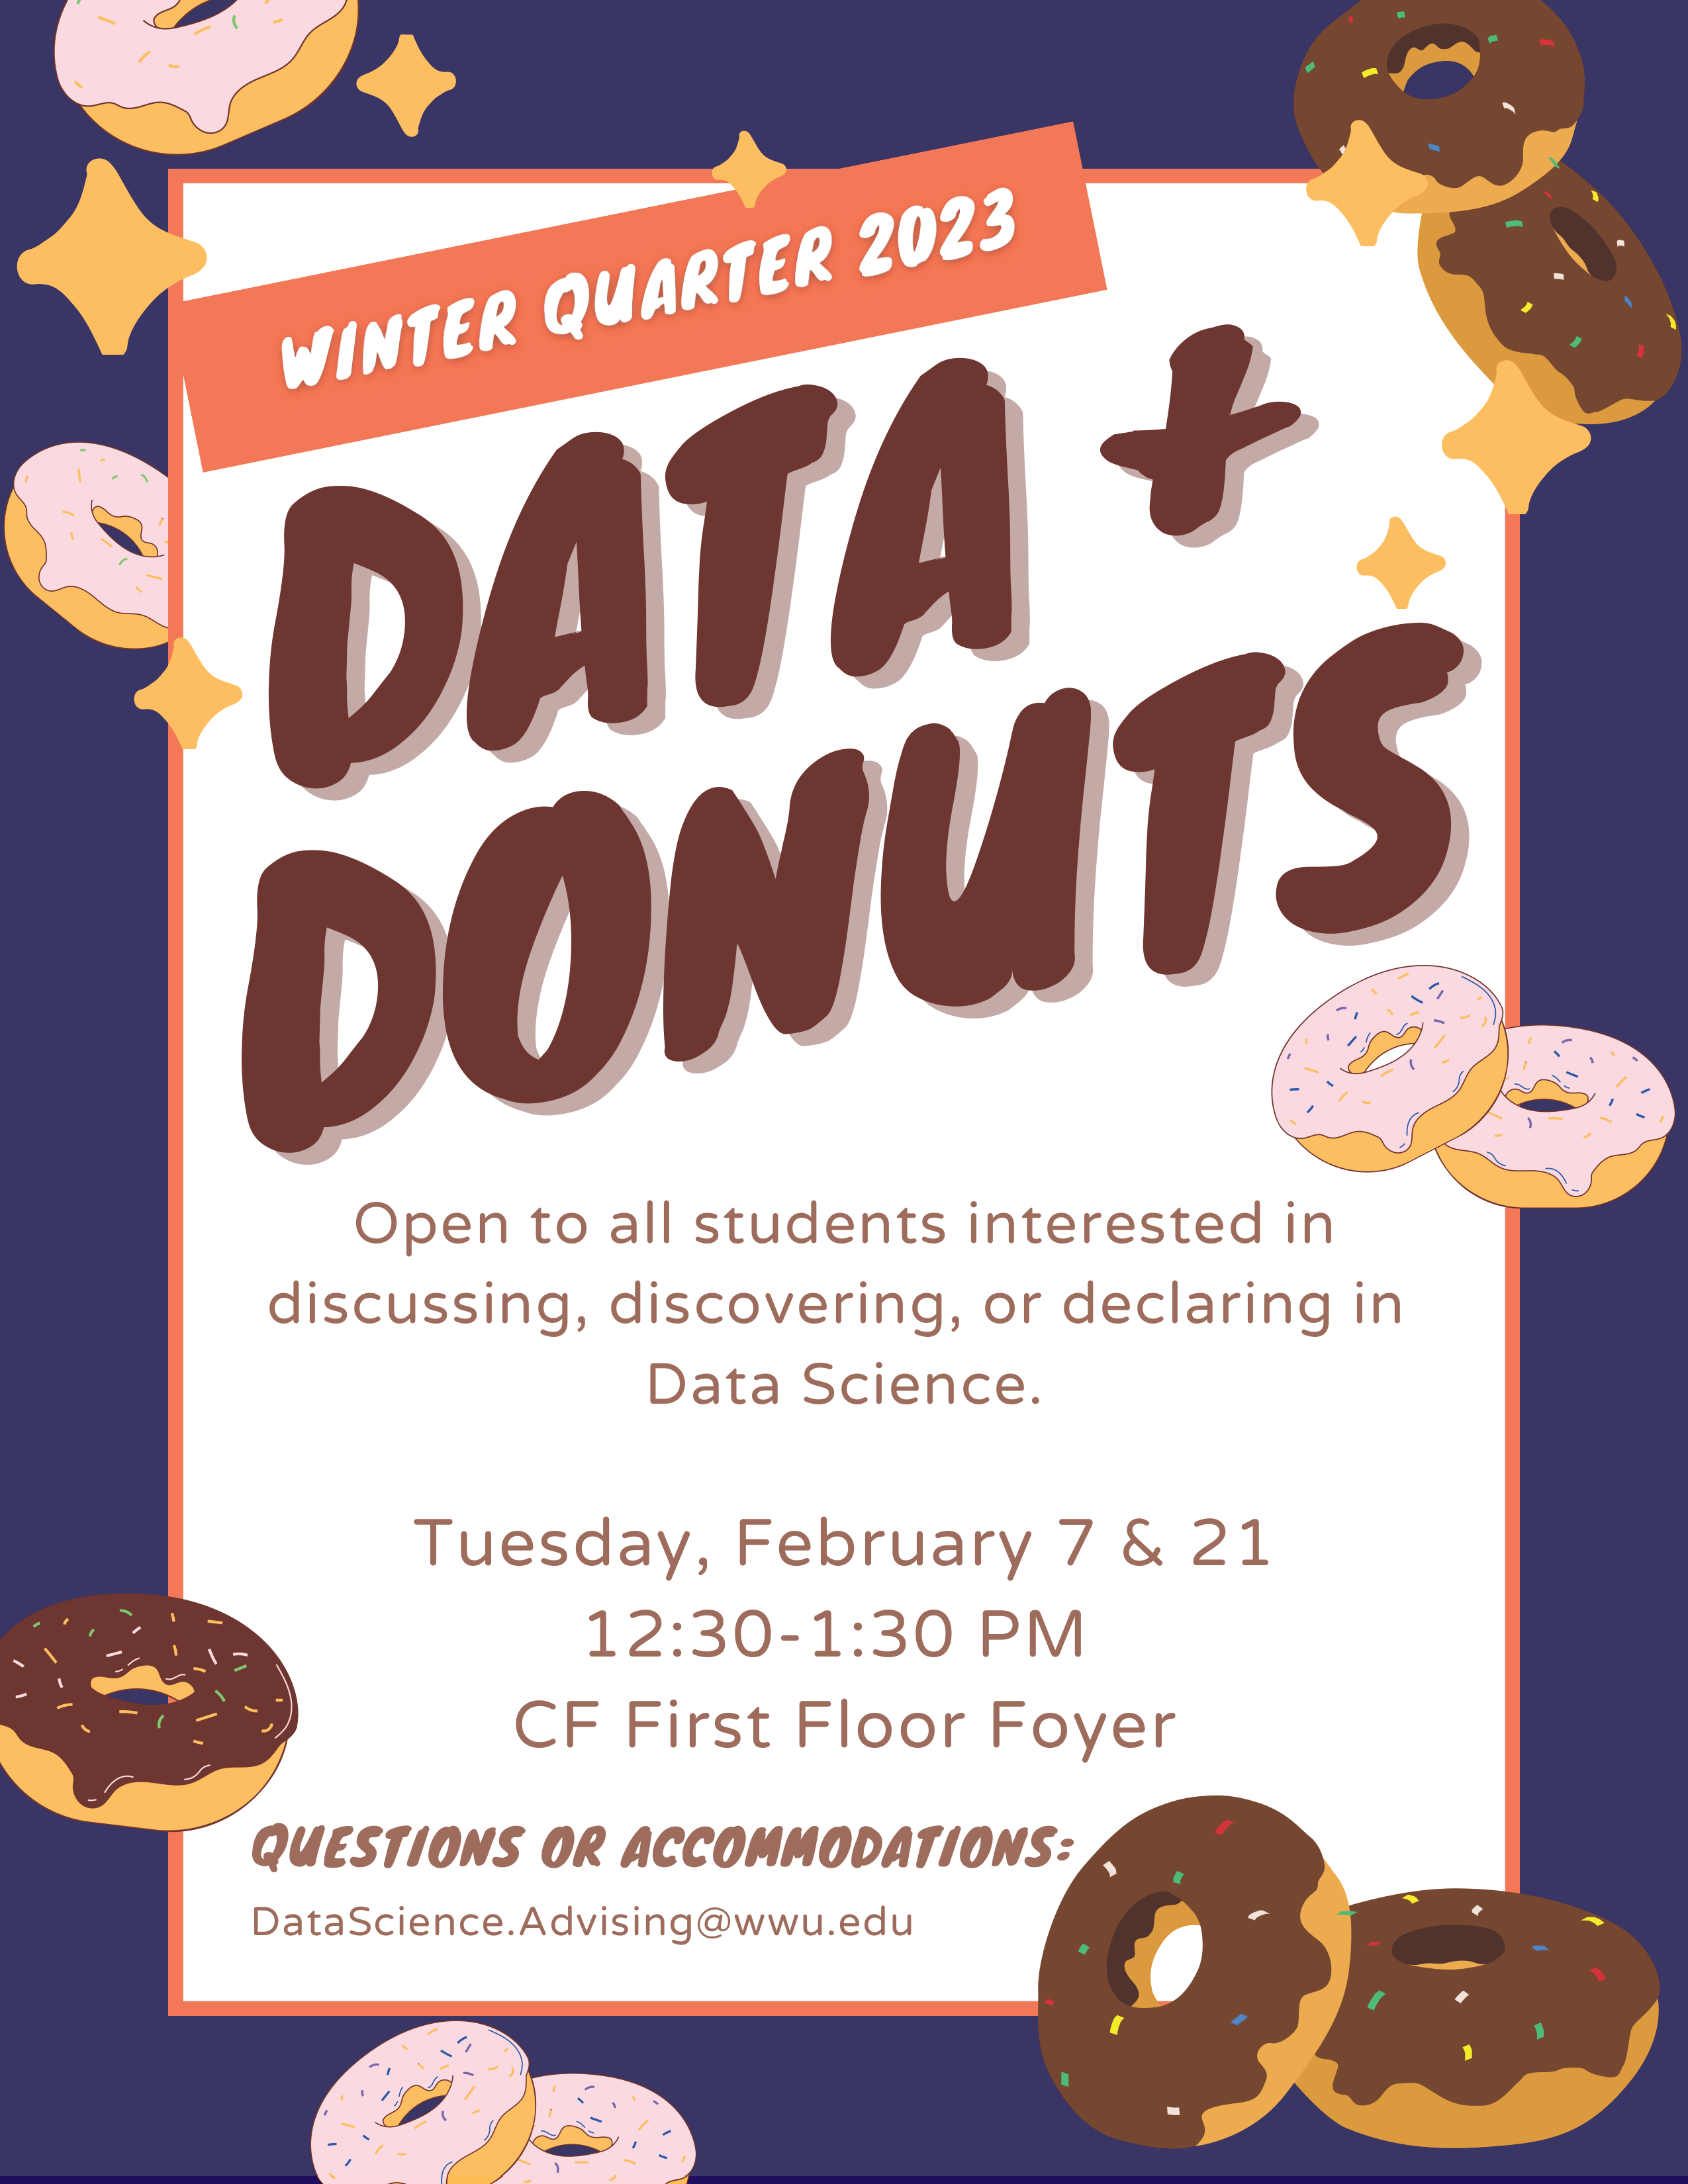 Winter Quarter 2023 Data + Donuts - Open to all students interested in discussing, discovering, or declaring in Data Science. Tuesday, February 7 & 21, 12:30-1:30 PM, CF First Floor Foyer